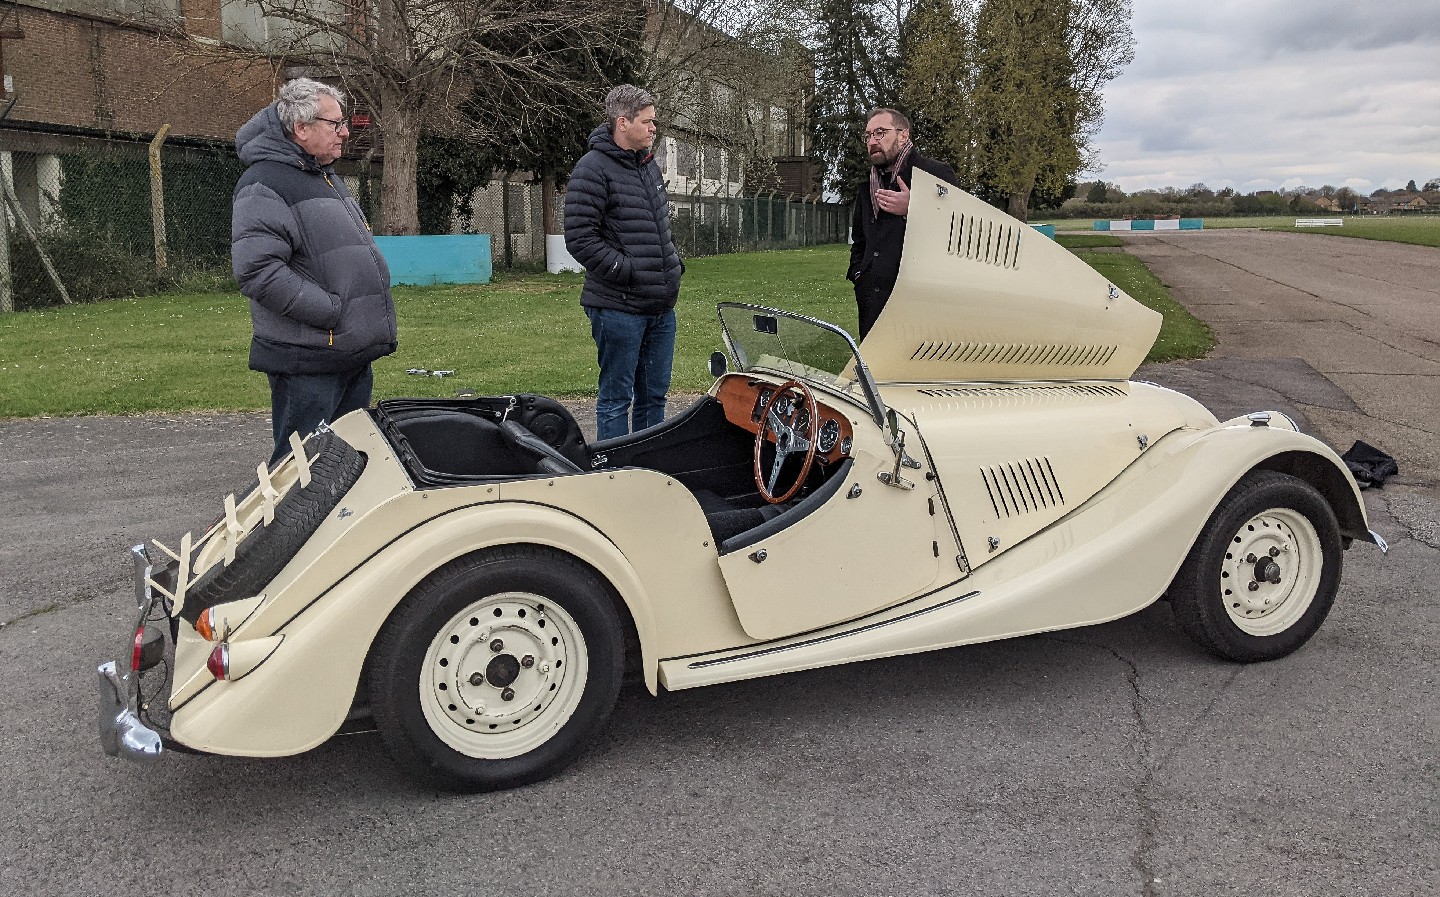 Will Dron, Steve Drummond, Ian Newstead: Electrogenic classic car electric conversions